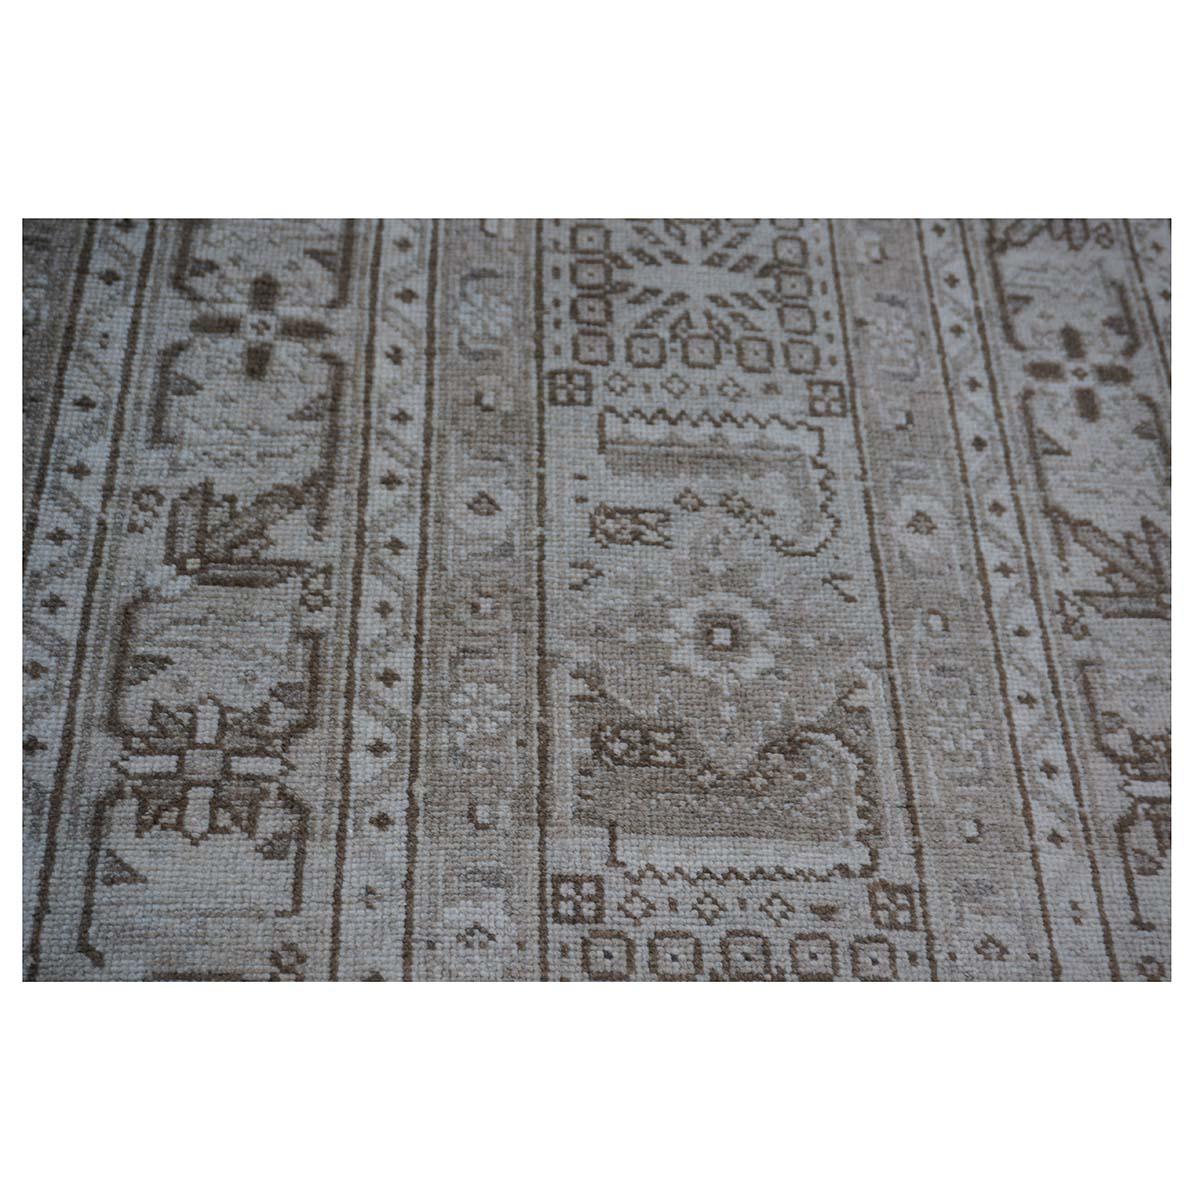 Antique Shabby Chic Distressed Persian Tabriz 13x18 Ivory & Tan Handmade Rug For Sale 10